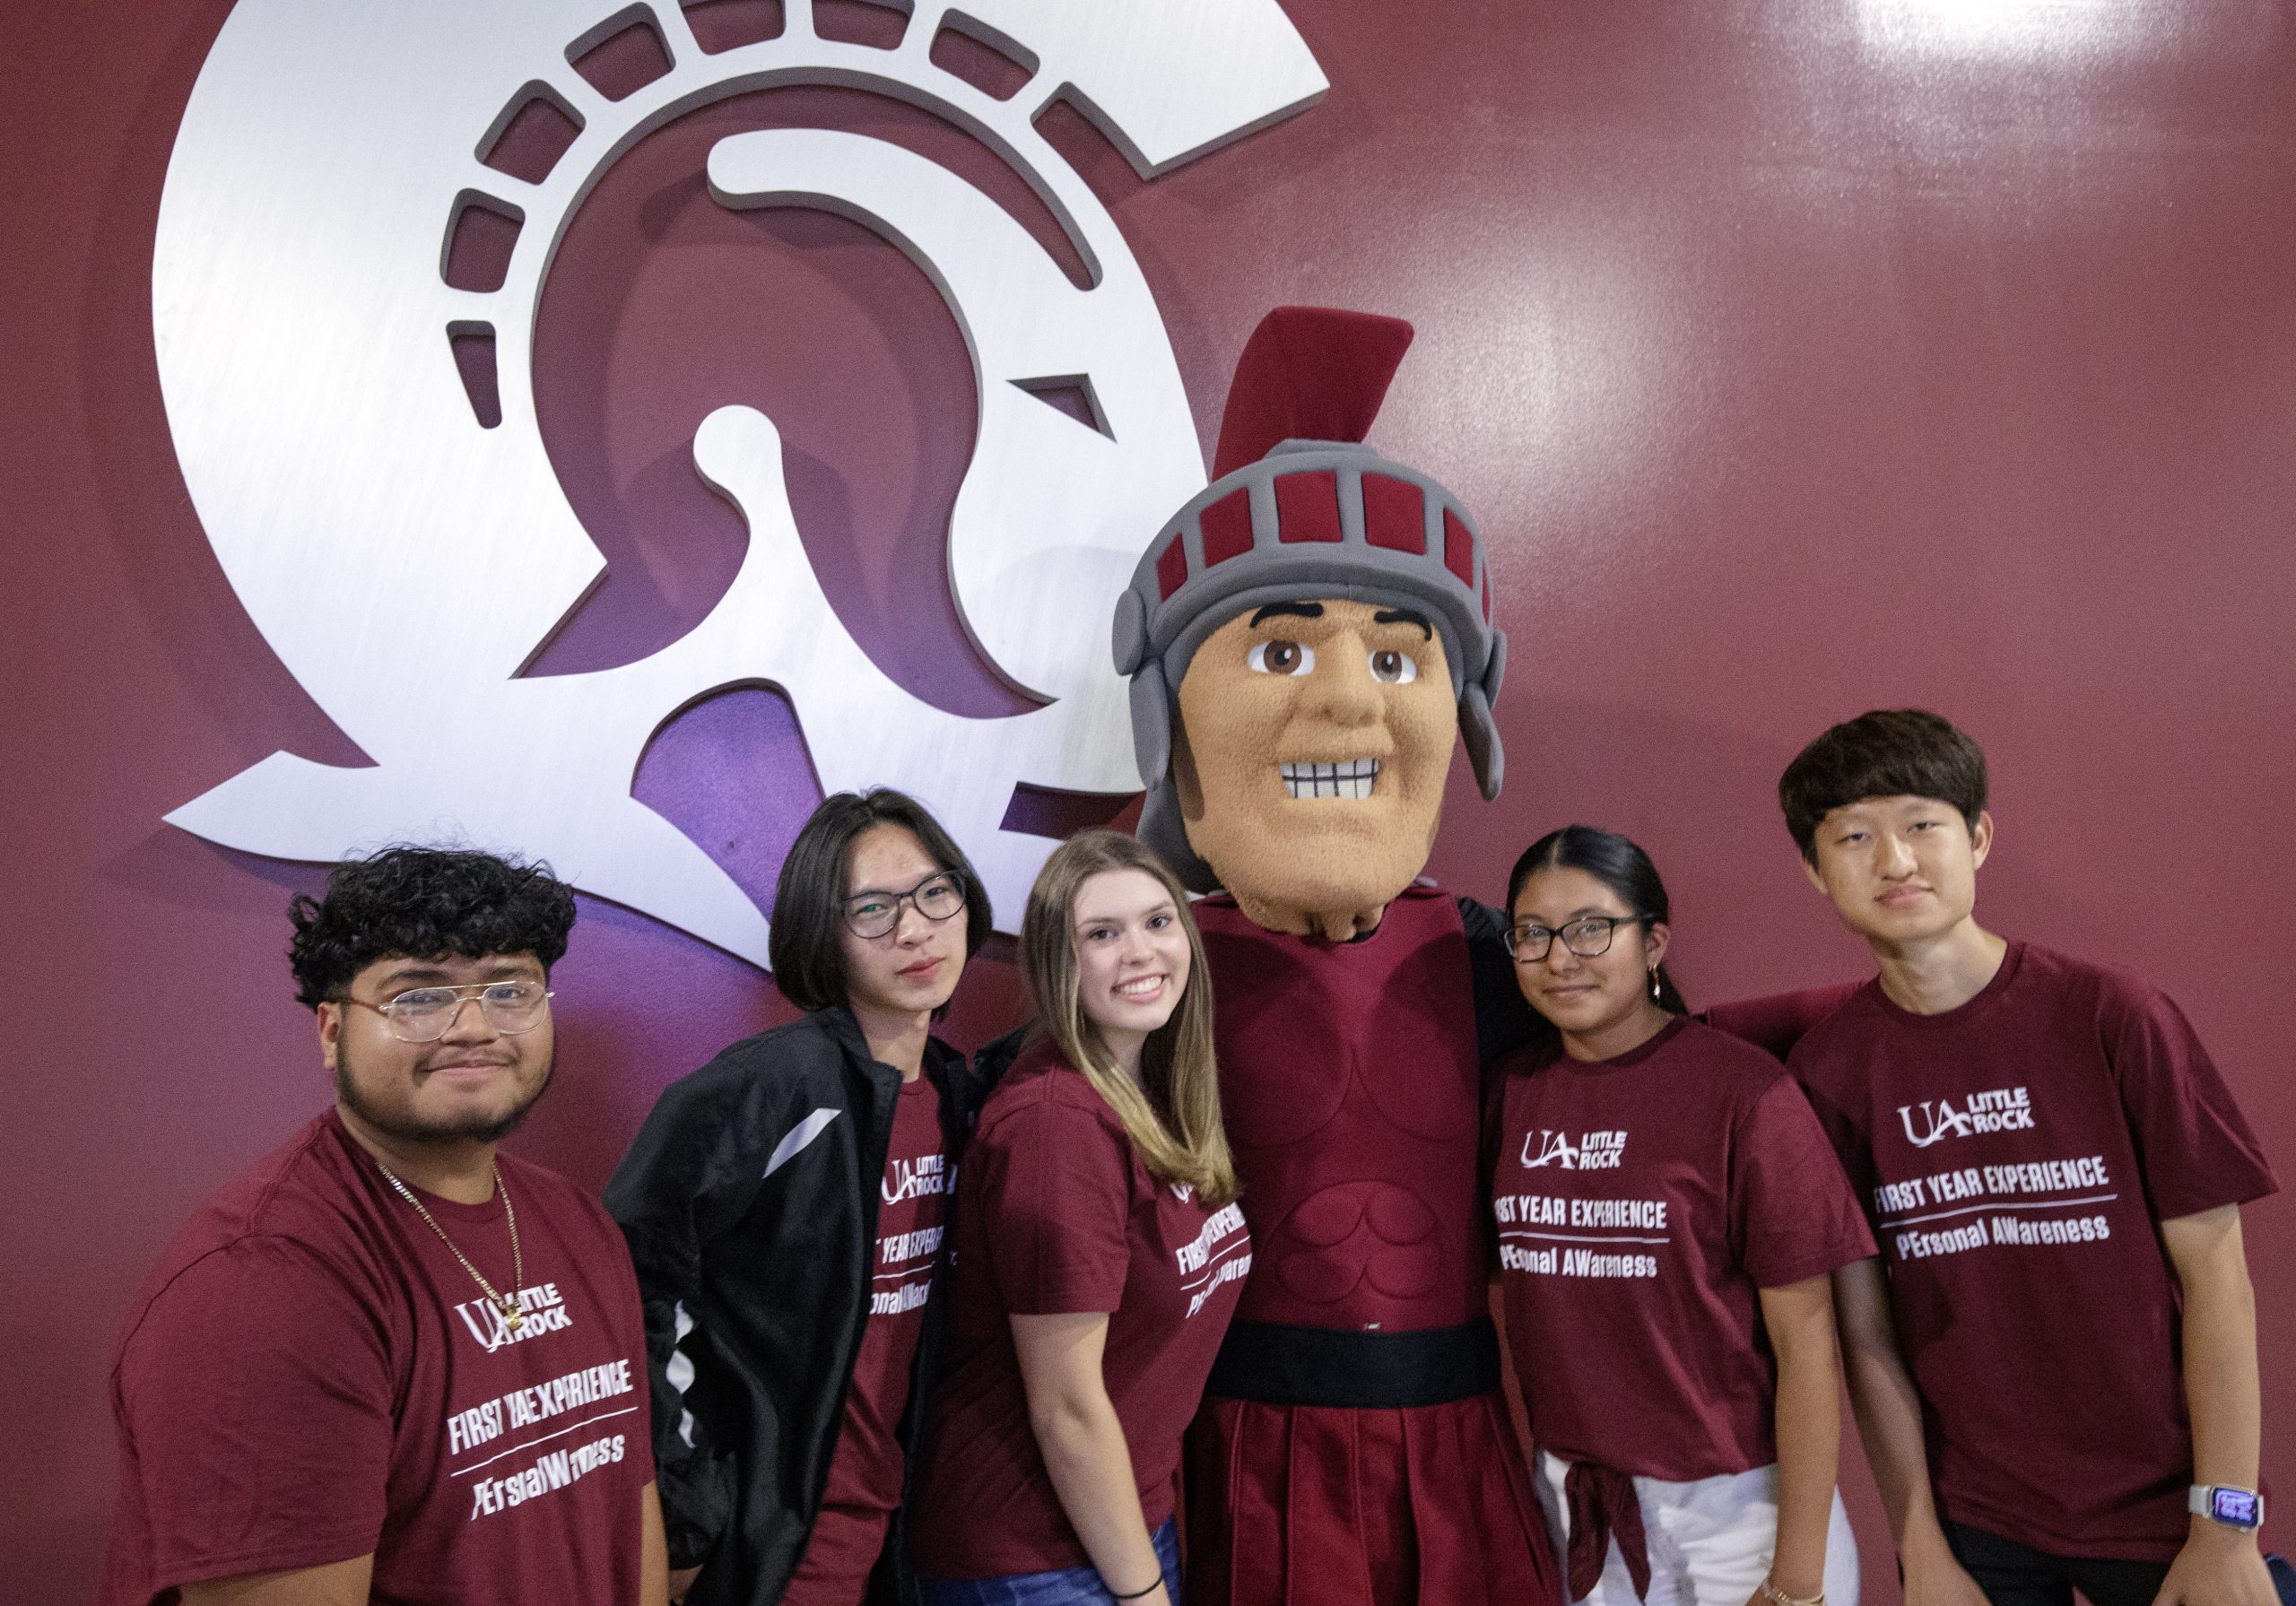 First Year Experience students in the PEAW Personal Awareness program participate in group picture day with the Trojan mascot at the Jack Stephens Center. Photo by Ben Krain.